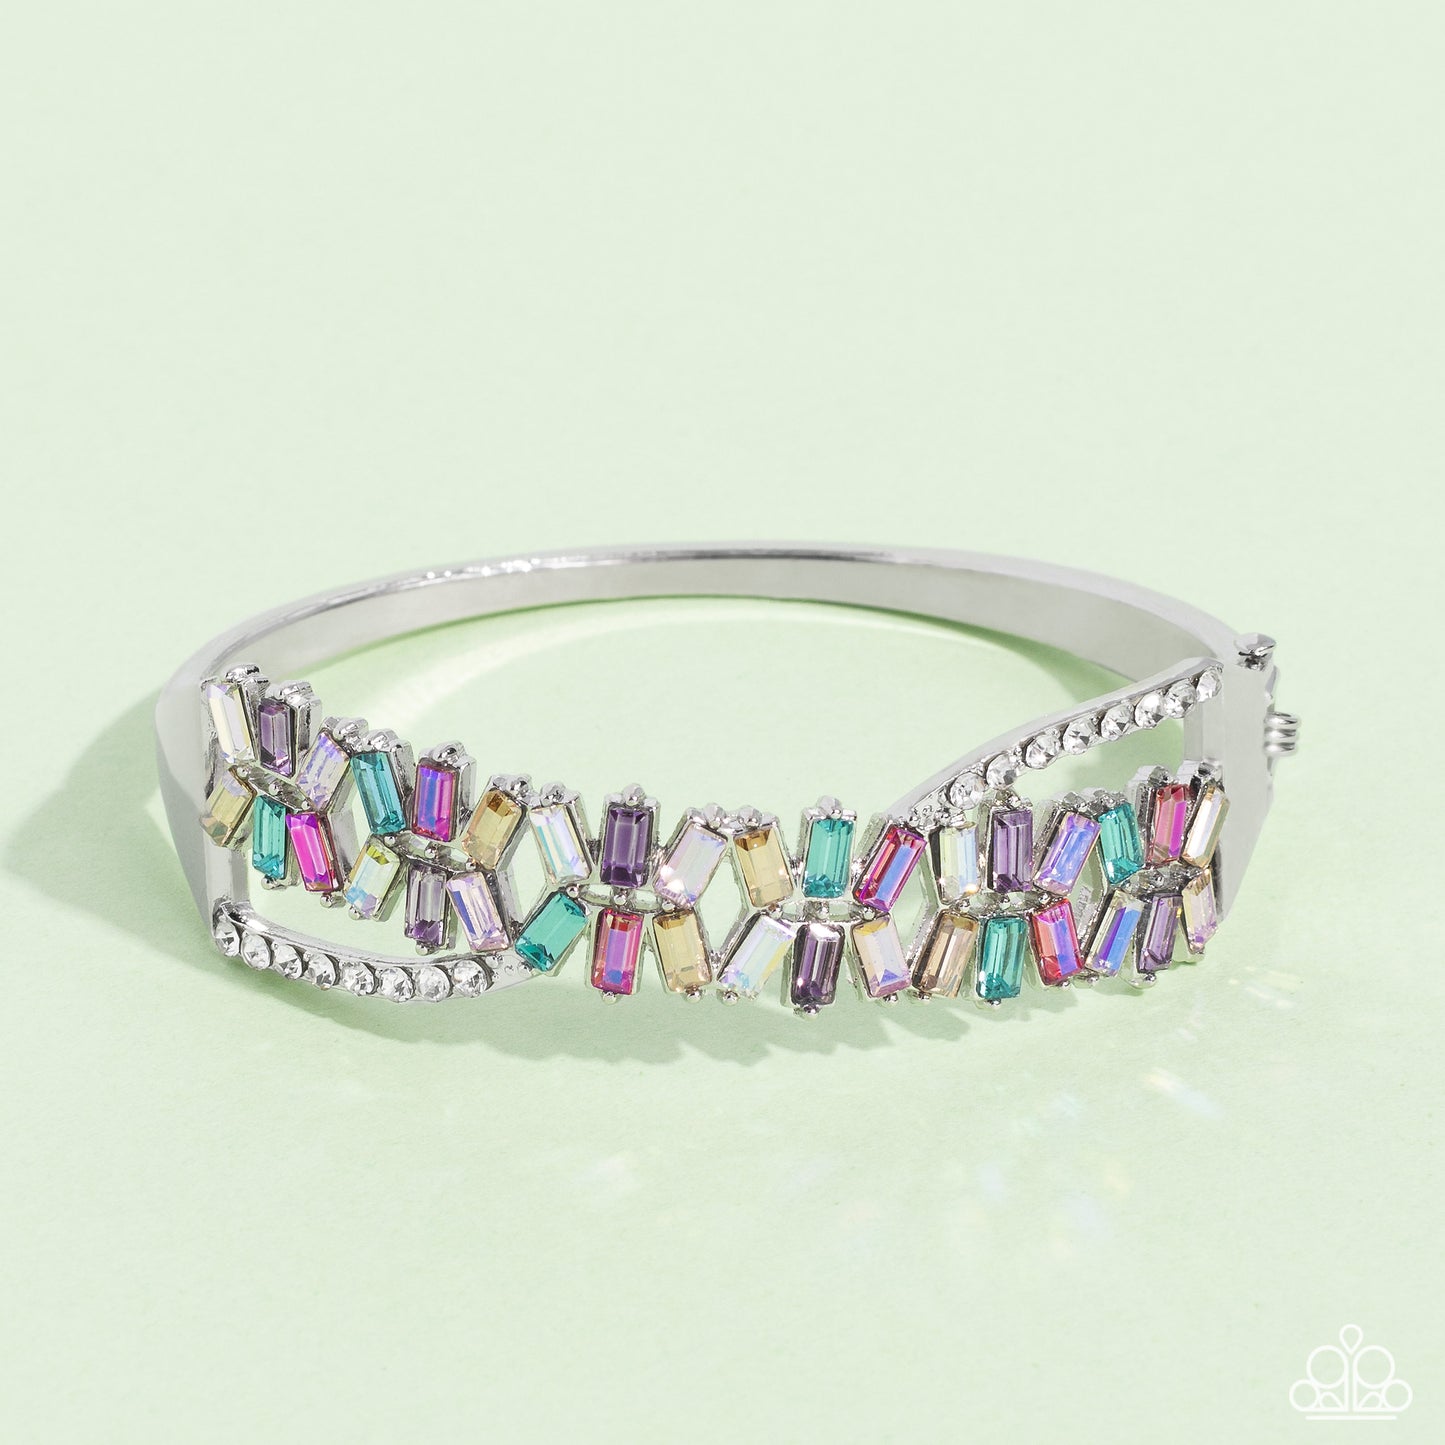 Modeled after the infinity symbol curves, a row of dainty white rhinestones playfully interacts with emerald-cut gems splashed in shades of amethyst, light blue, pink, smoked topaz, and iridescence. Set in clusters of three, the emerald-cuts haphazardly stack on top of one another for a timeless, geometric radiance atop the wrist. Due to its prismatic palette, color may vary. Features a hinged closure.  Sold as one individual bracelet.